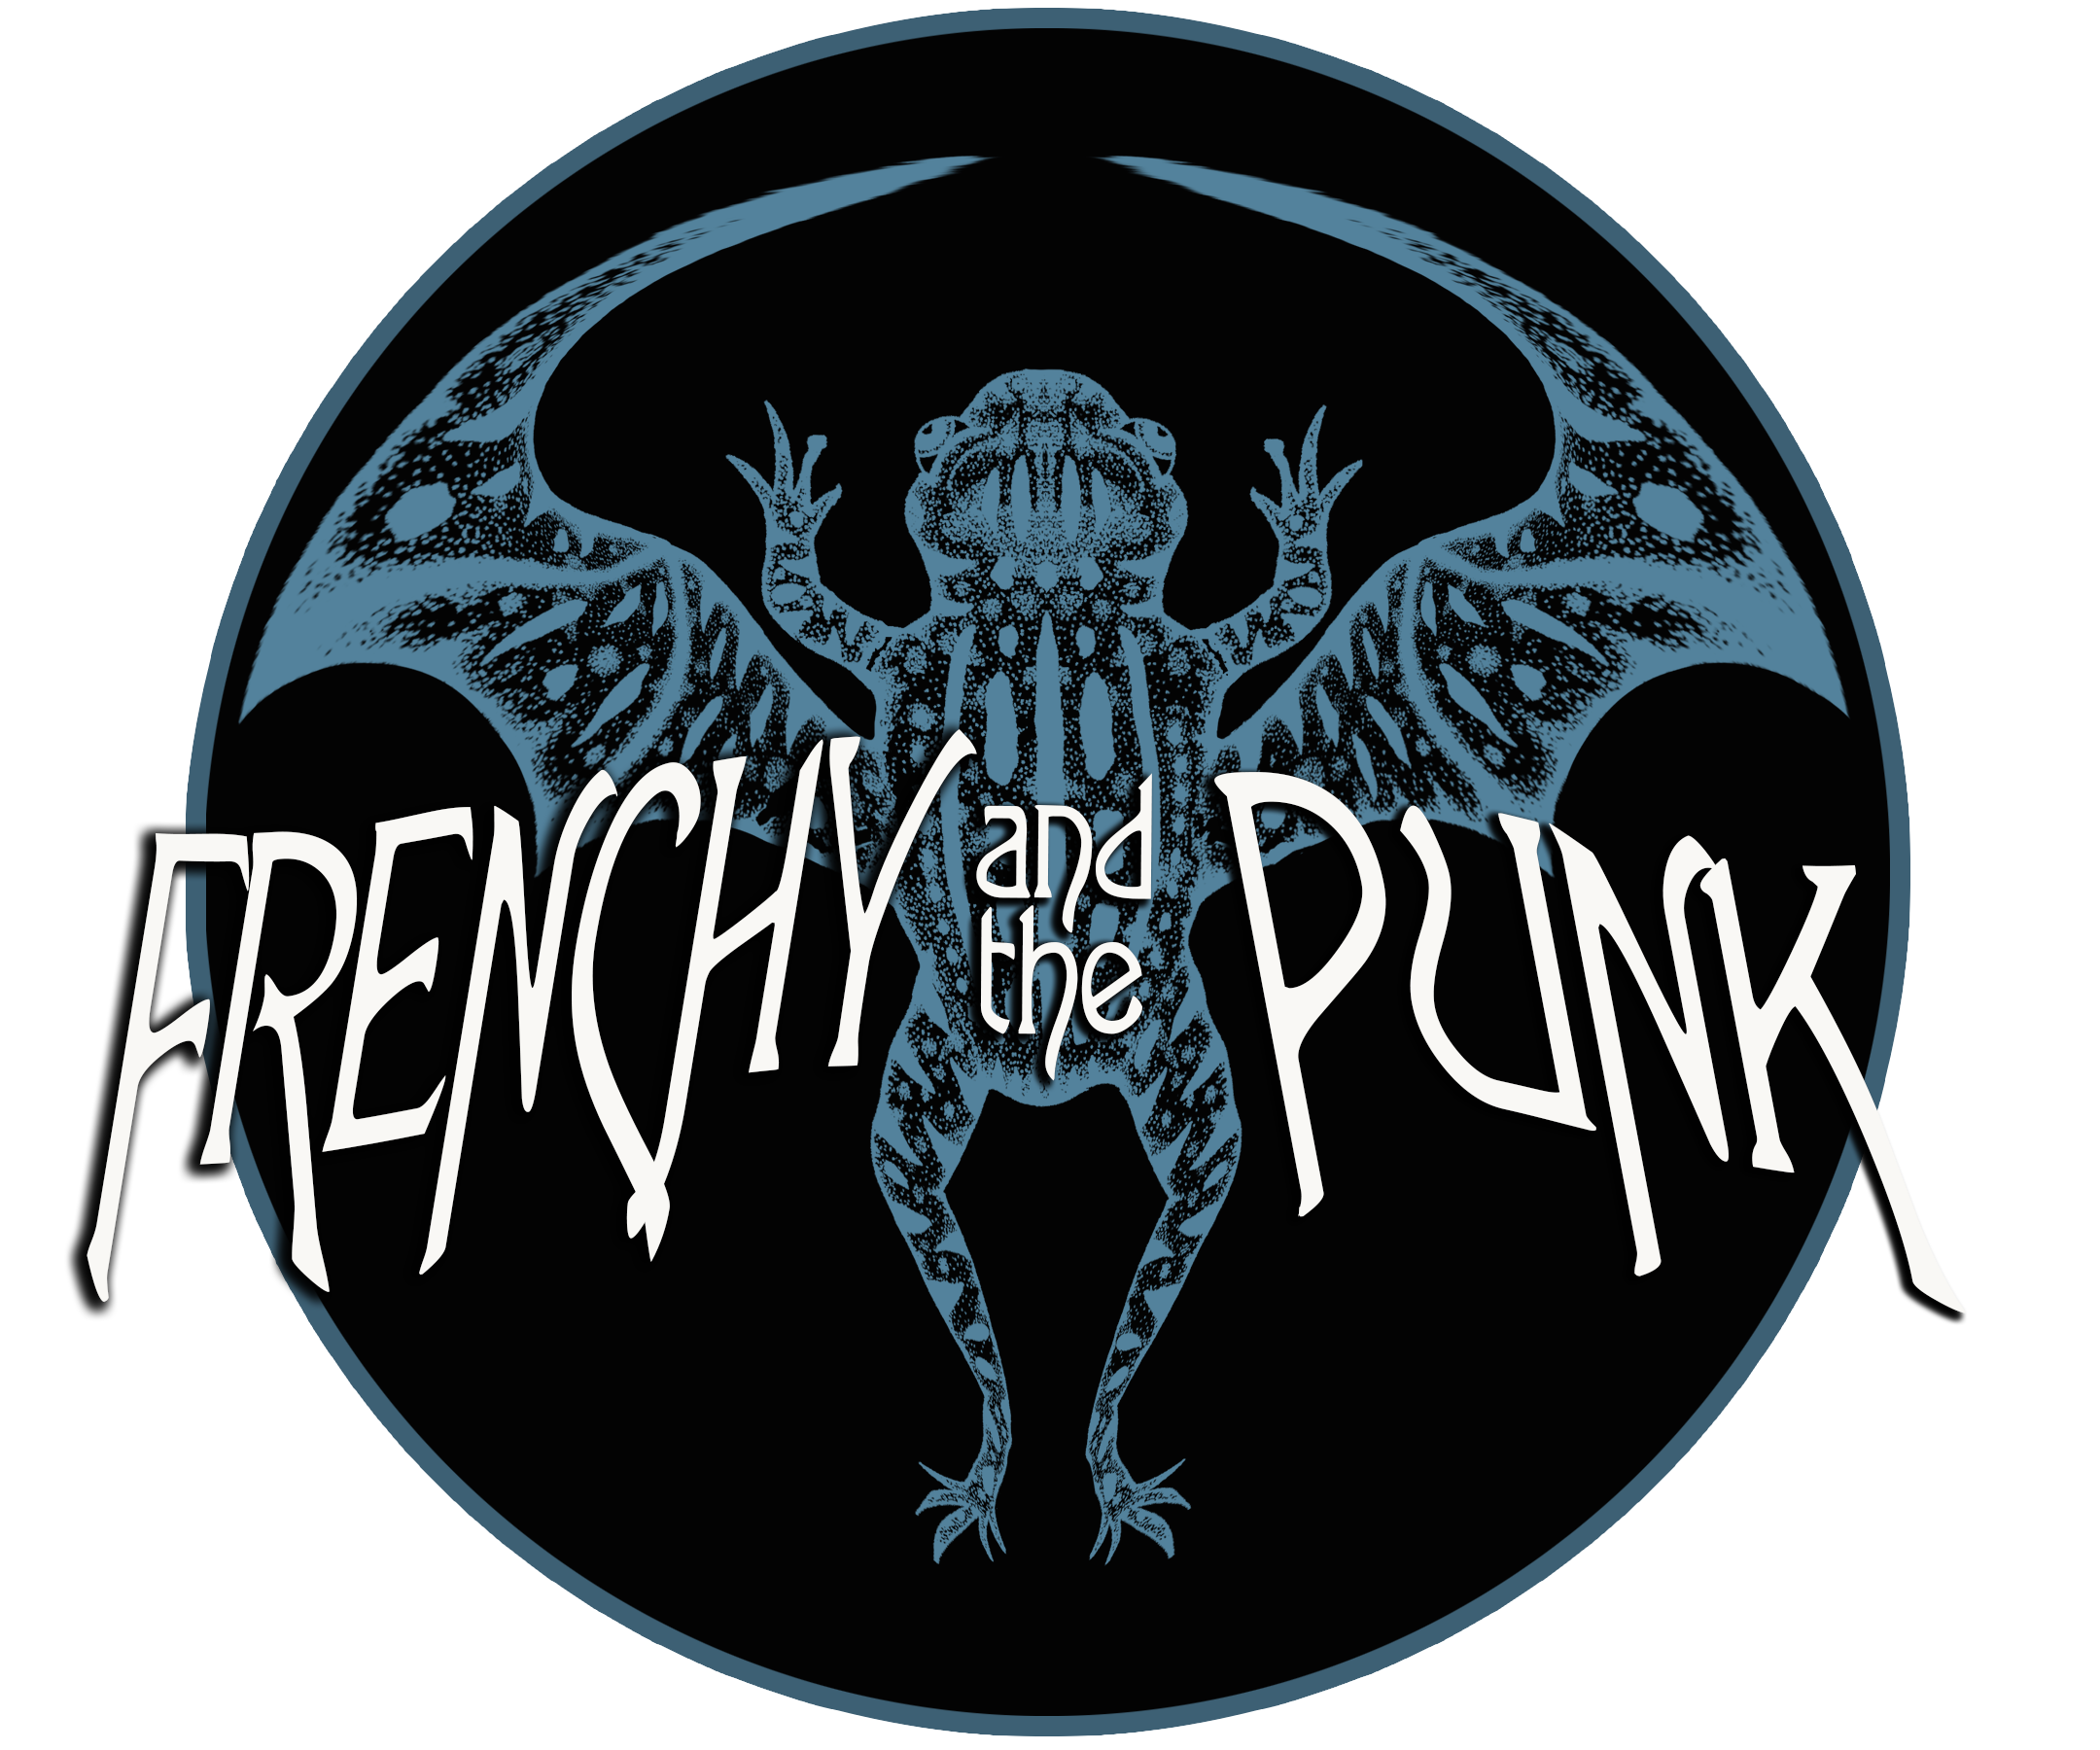 Frenchy and the Punk Logo"